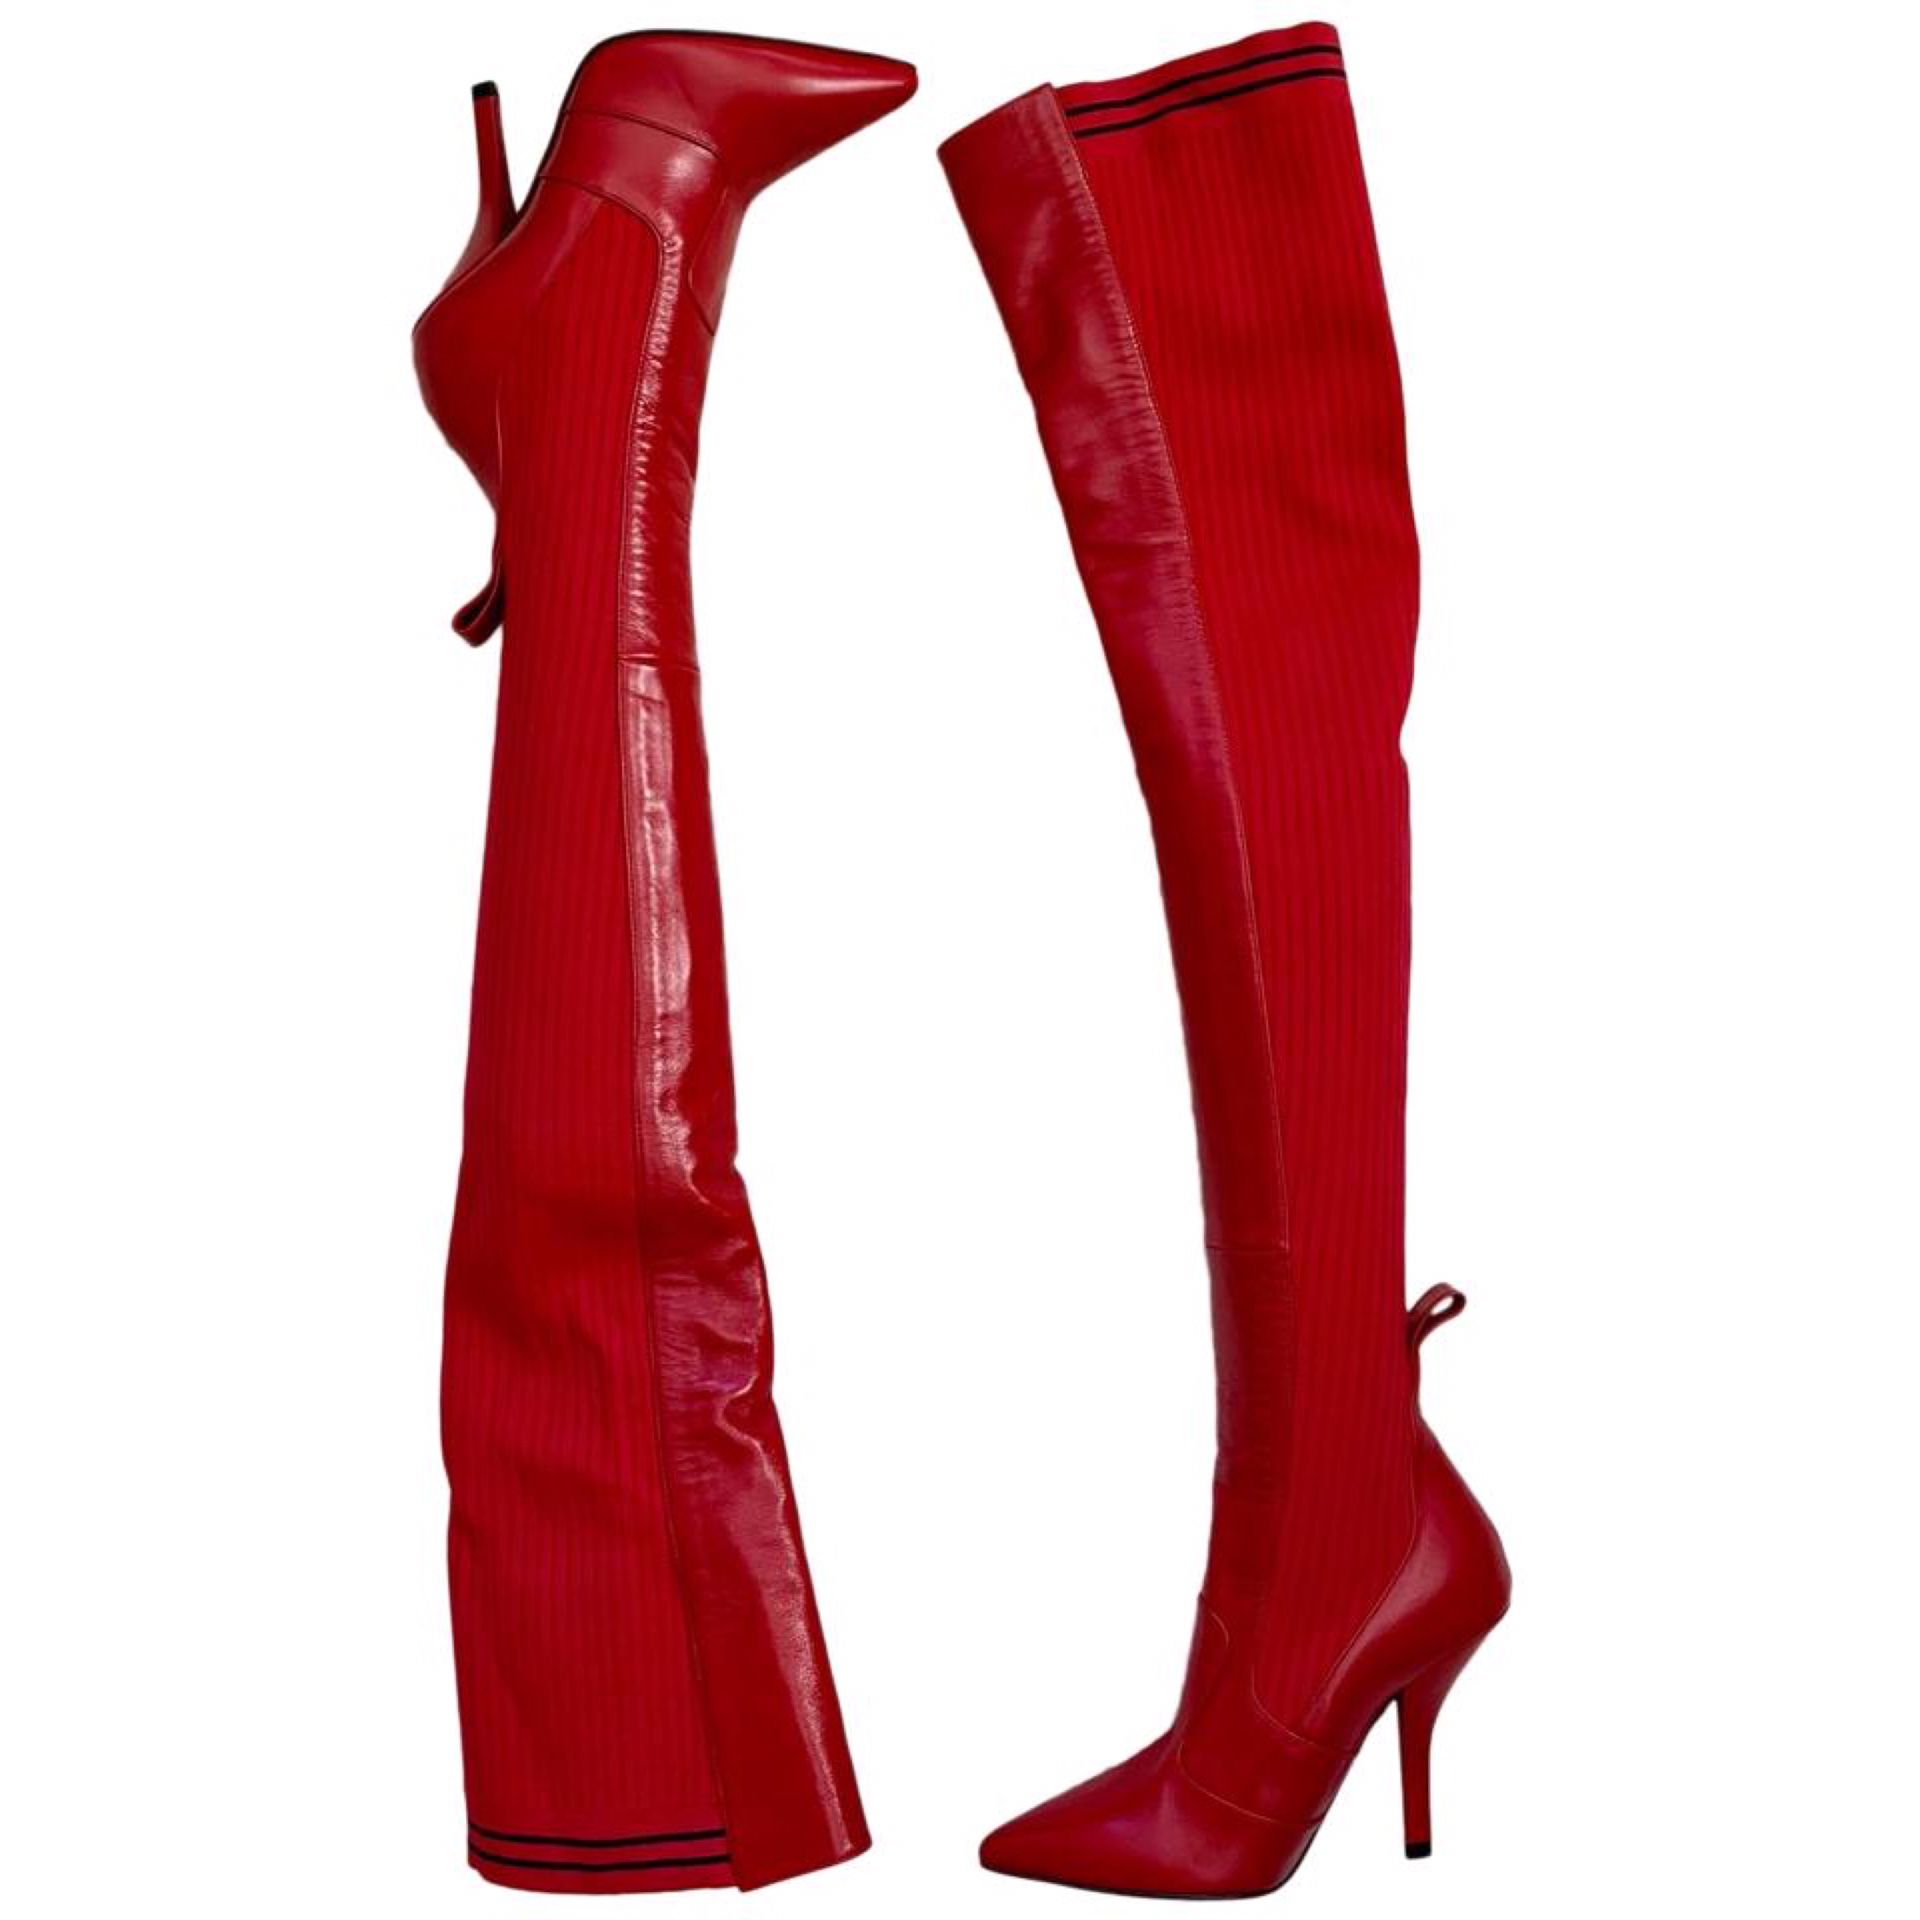 FENDI Red Leather Cuissard Thigh High Boots! Authentic!!